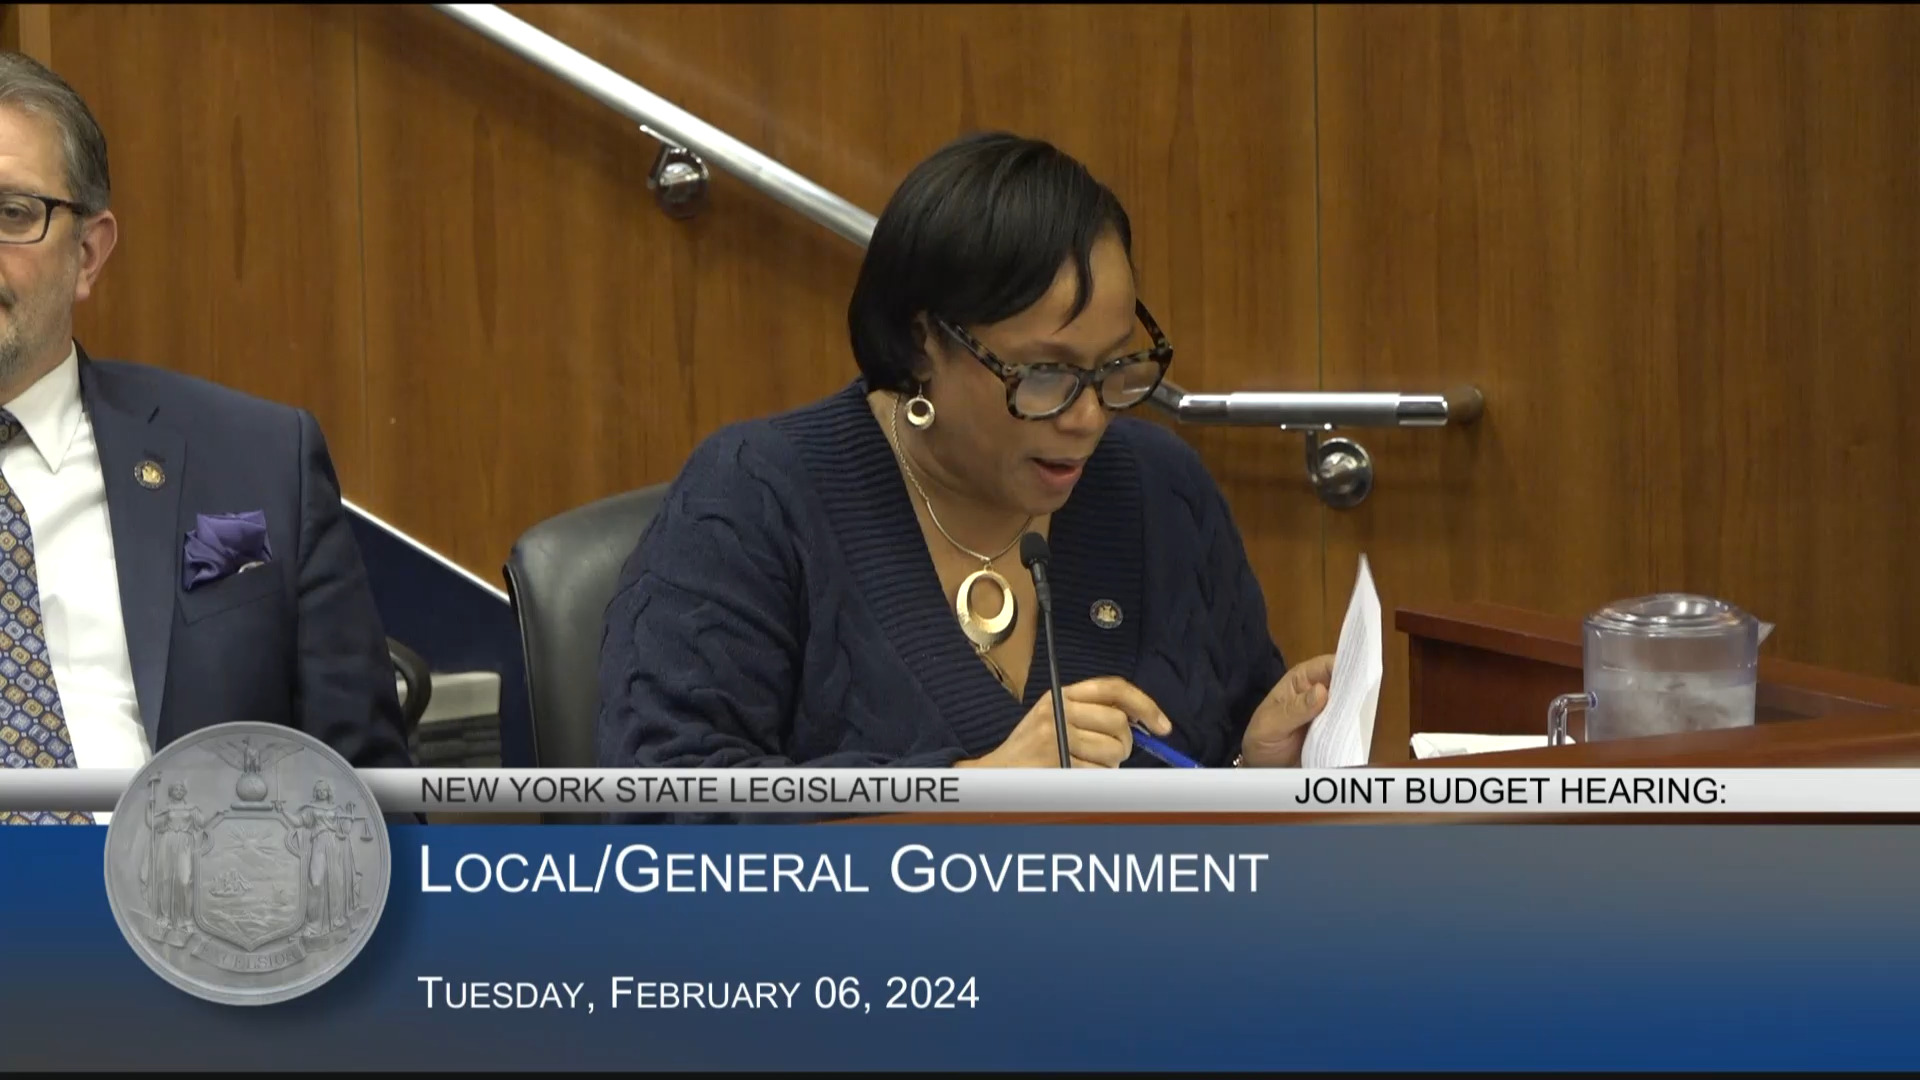 NYC Officials Testify During Budget Hearing on Local/General Government